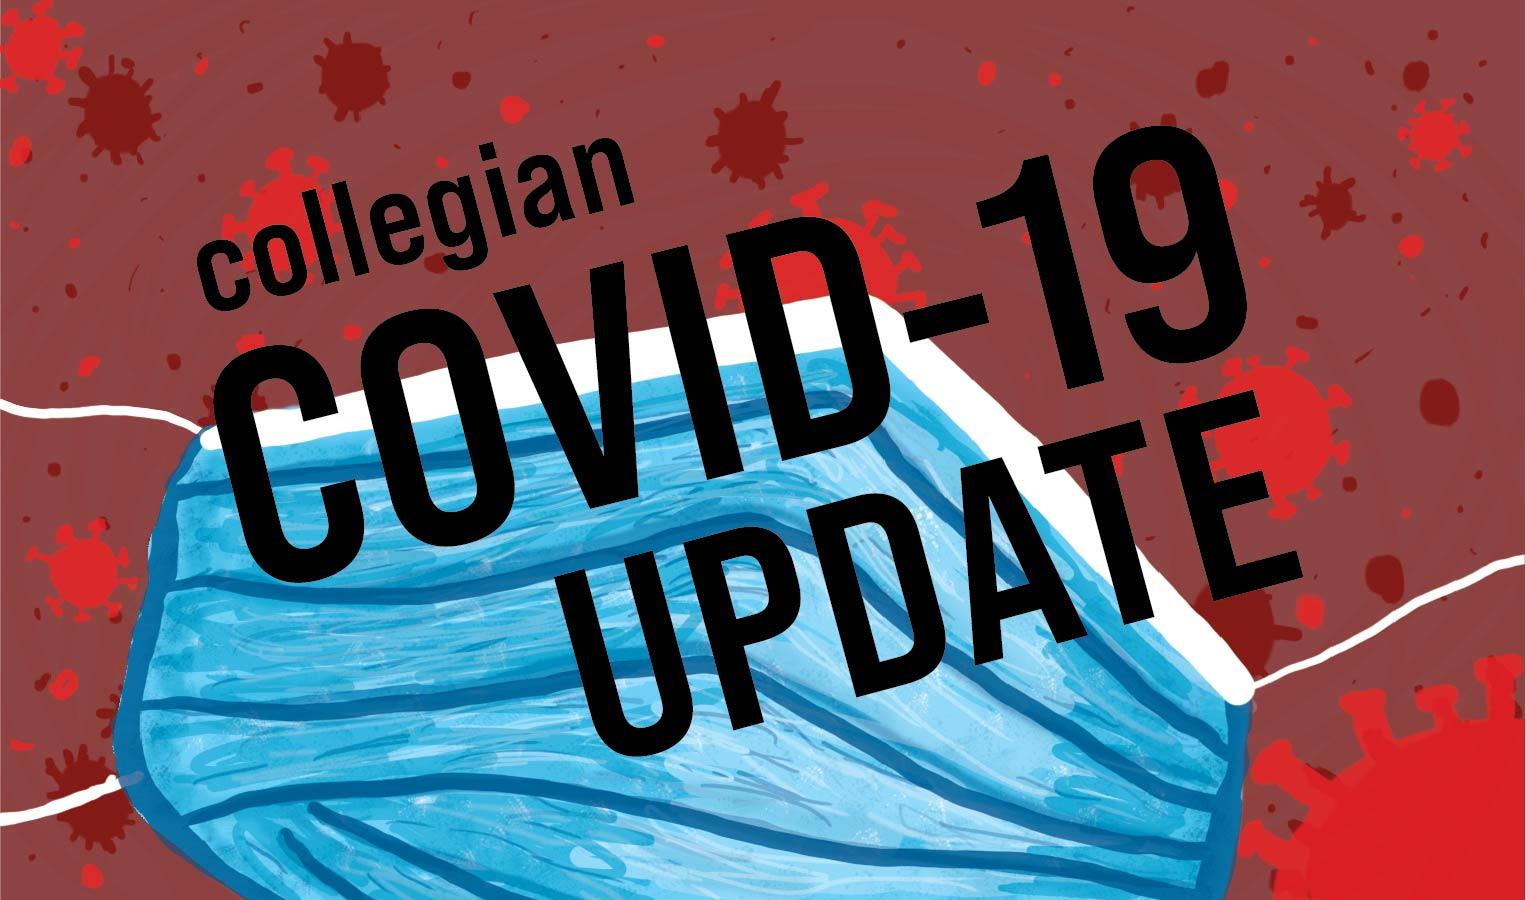 Graphic showing COVID-19 bubbles floating around in a red background behind a blue surgical mask. Text reads "Collegian, COVID-19 UPDATE"